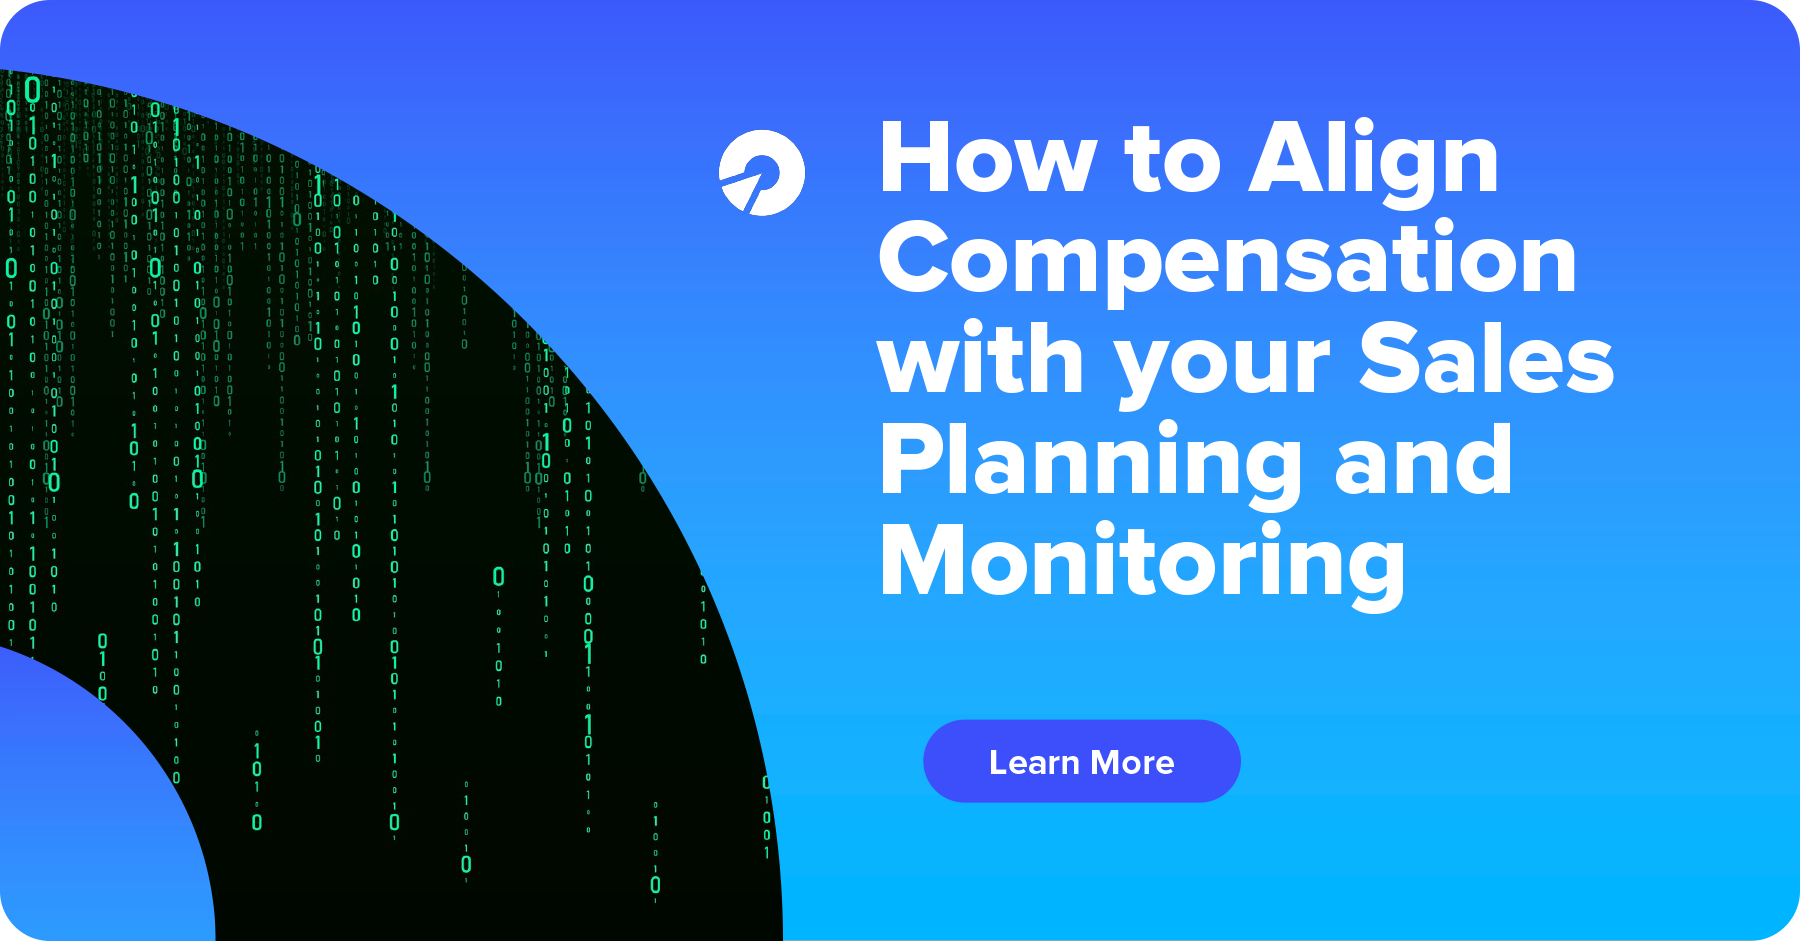 How to Align Compensation with your Sales Planning and Monitoring